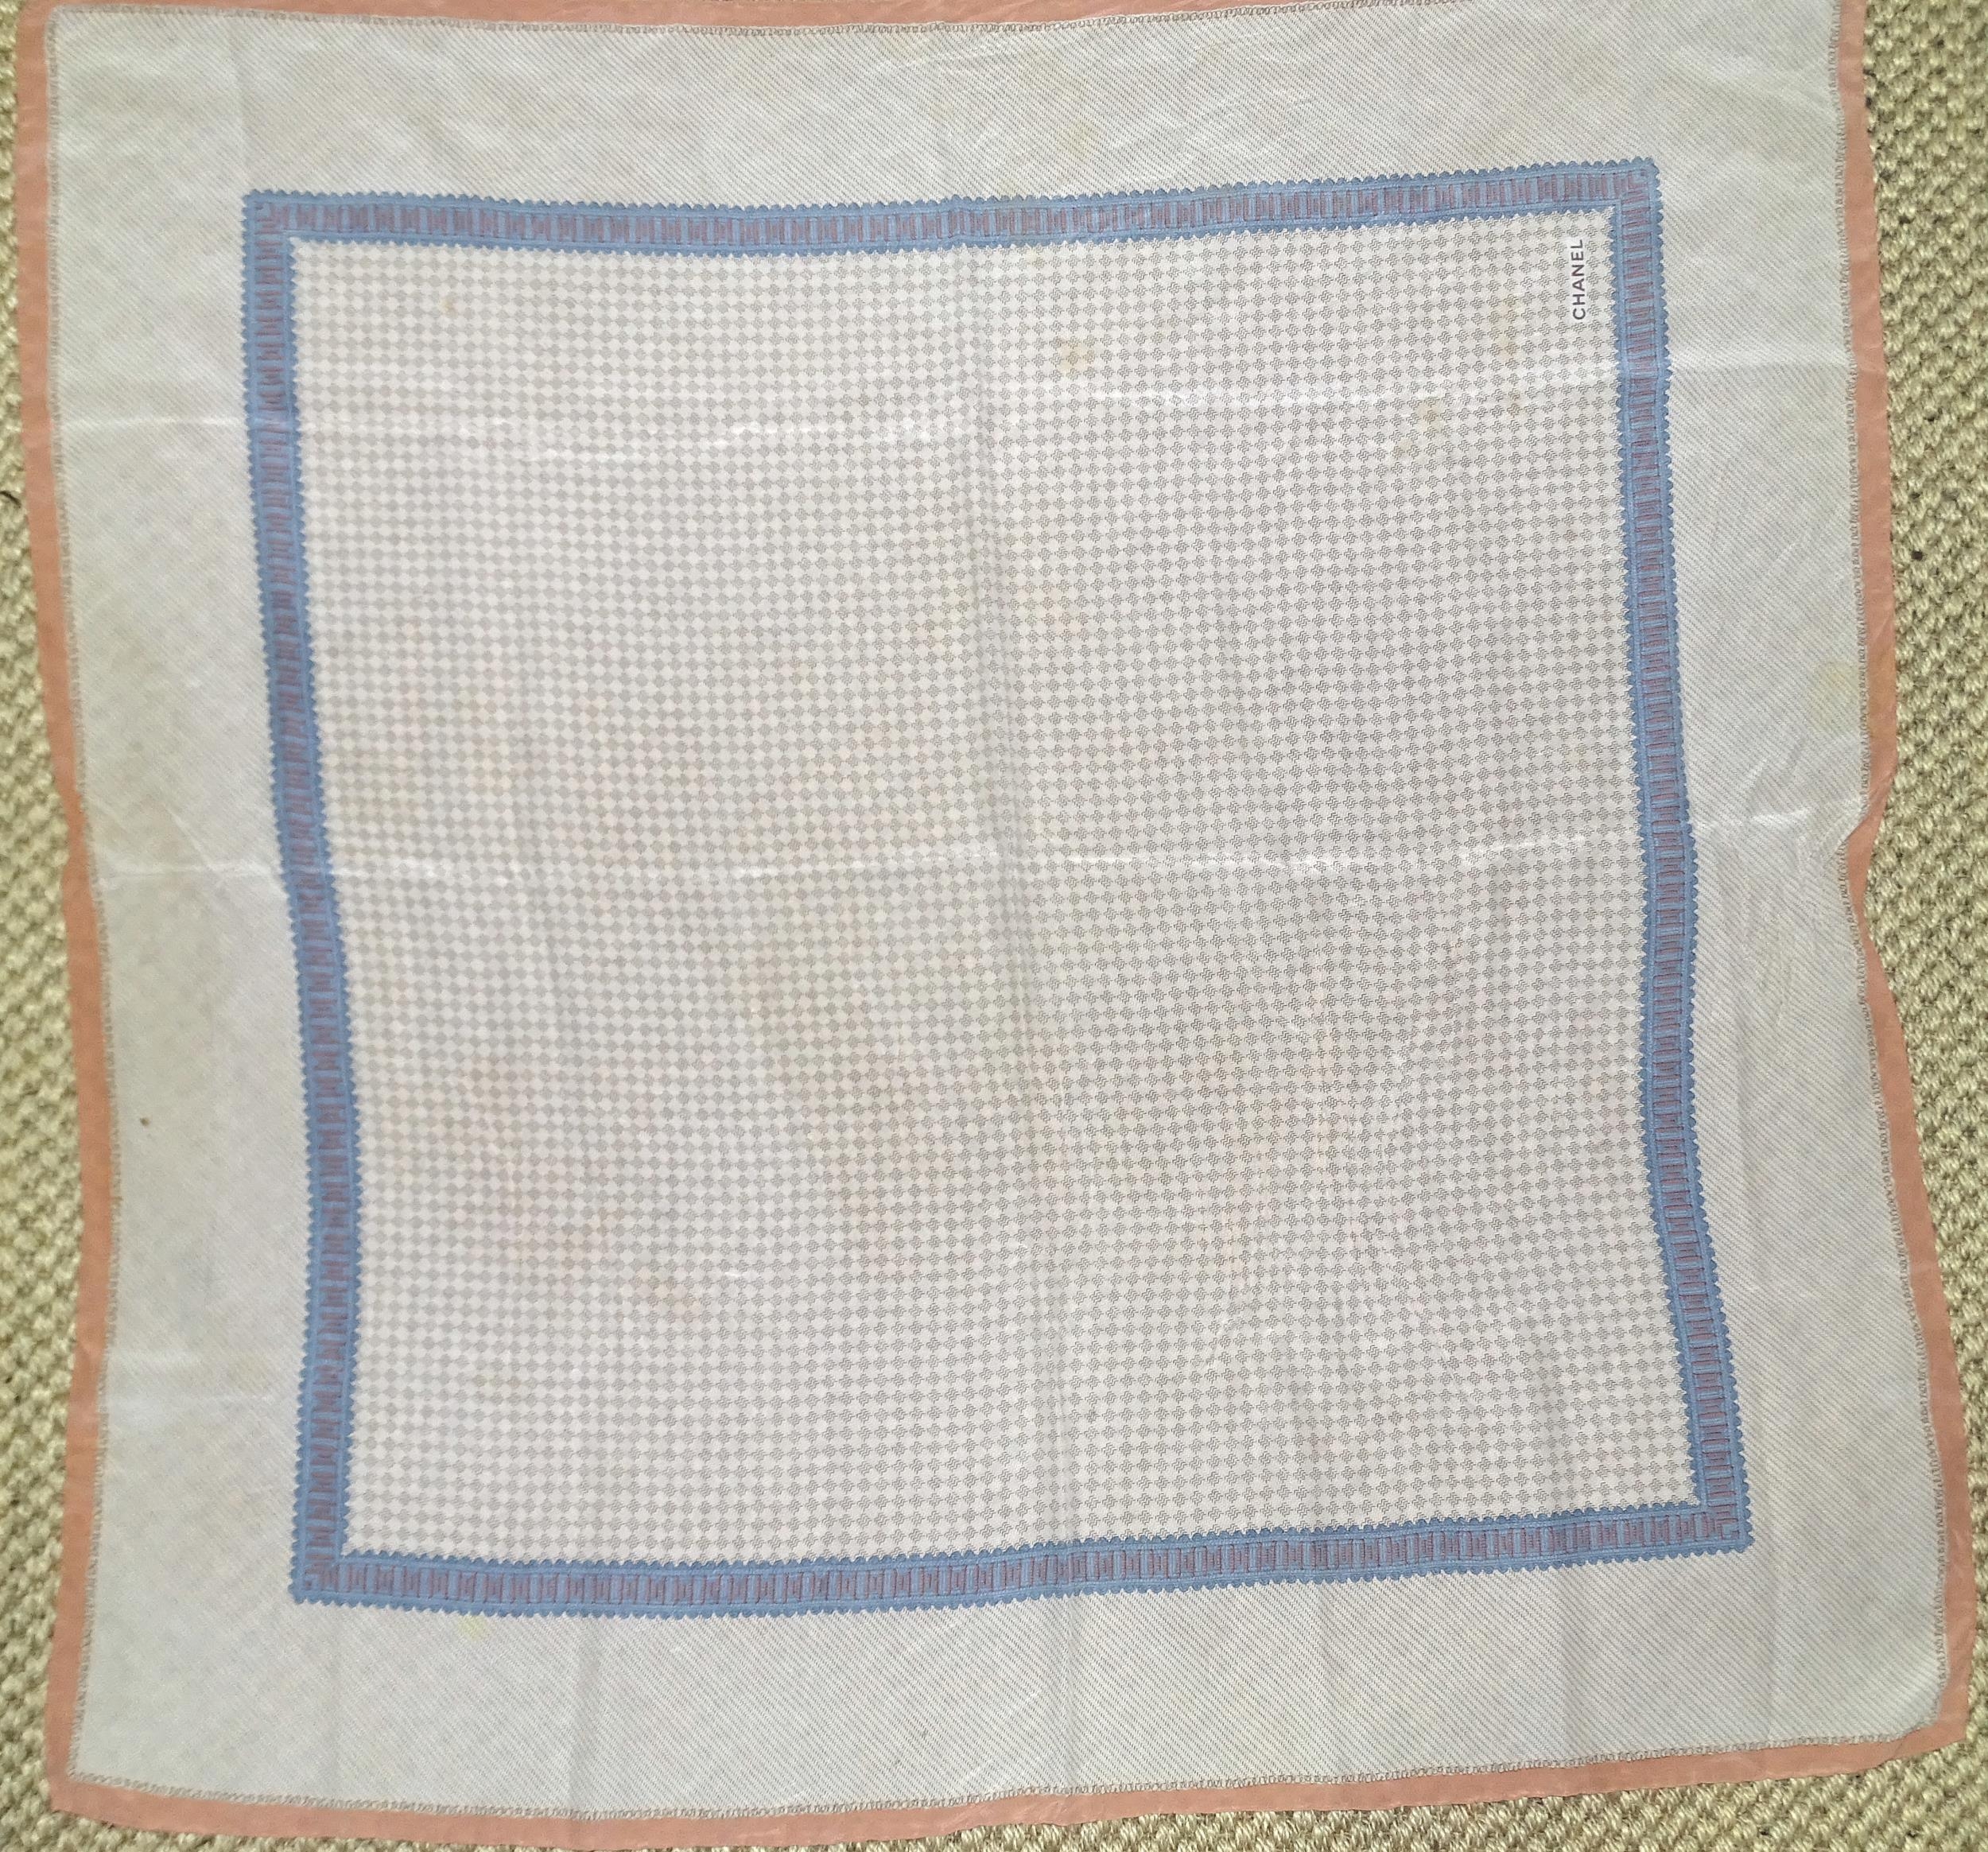 Chanel, a silk scarf in muted apricot and blue on a light background, 86cm square.